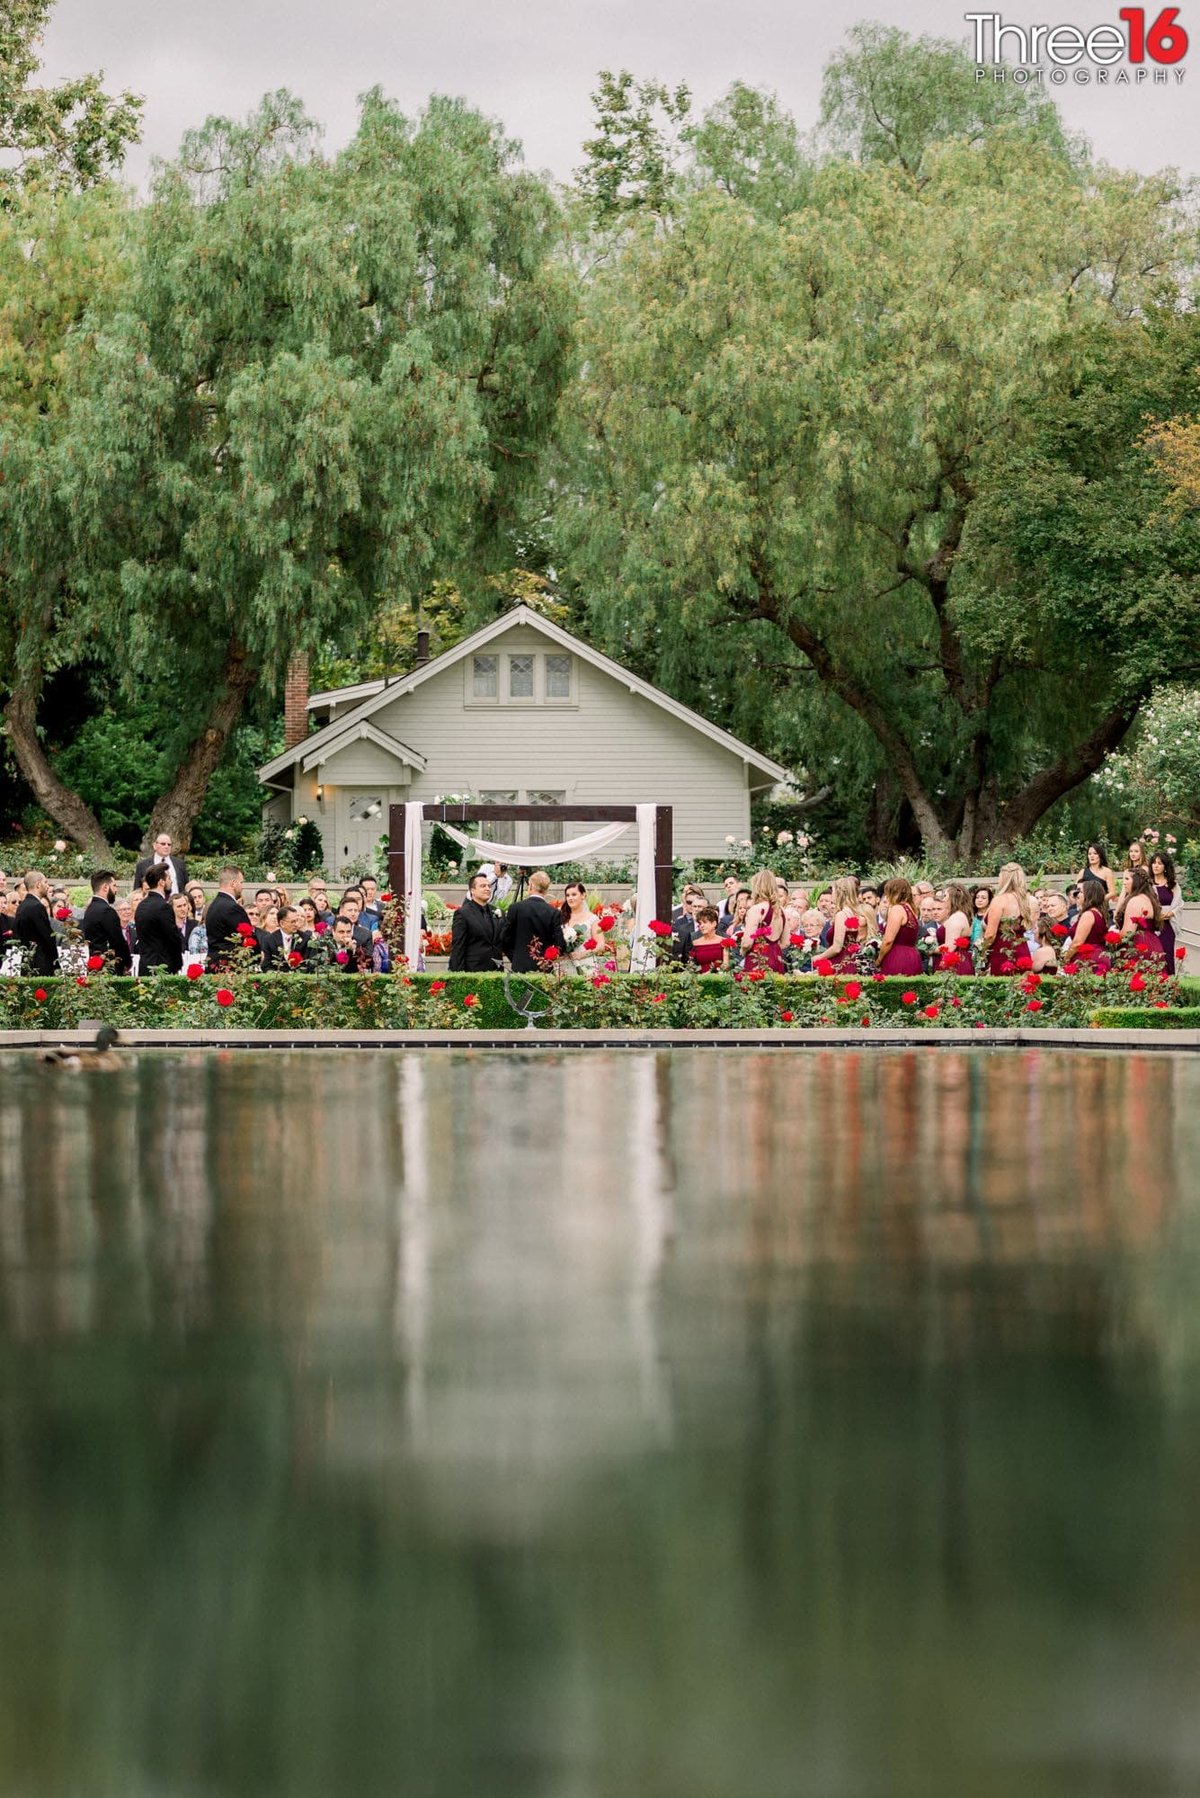 Wedding Ceremony from across the reflecting pool at the Richard Nixon Library